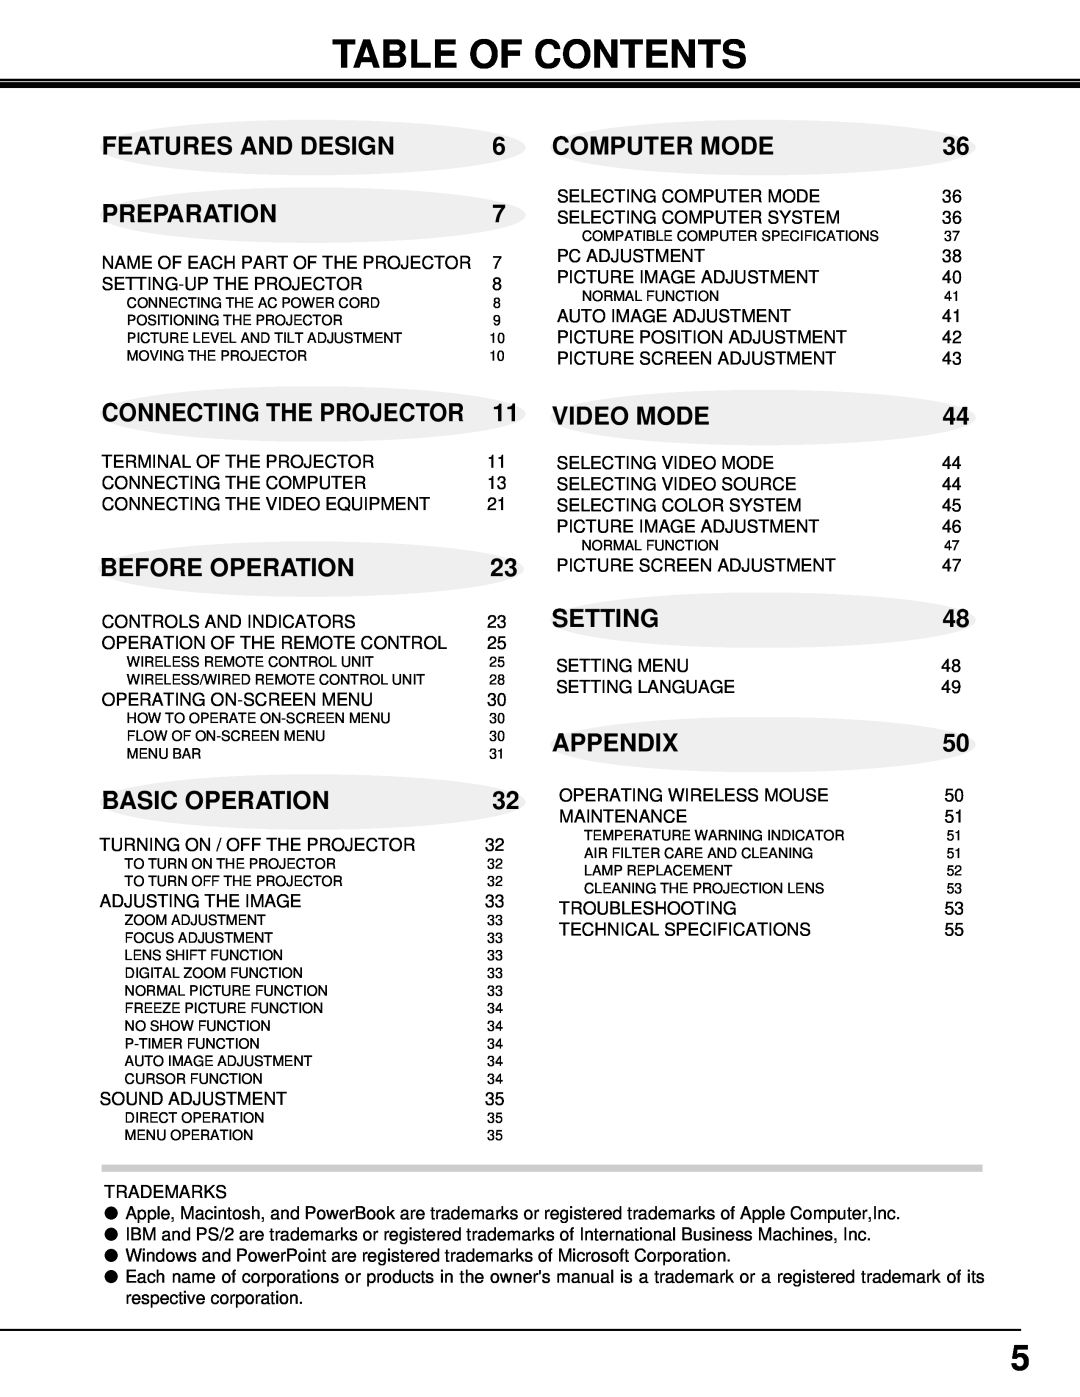 Eiki LC-X3/X3L Table Of Contents, Features And Design, Preparation, Computer Mode, Before Operation, Basic Operation 